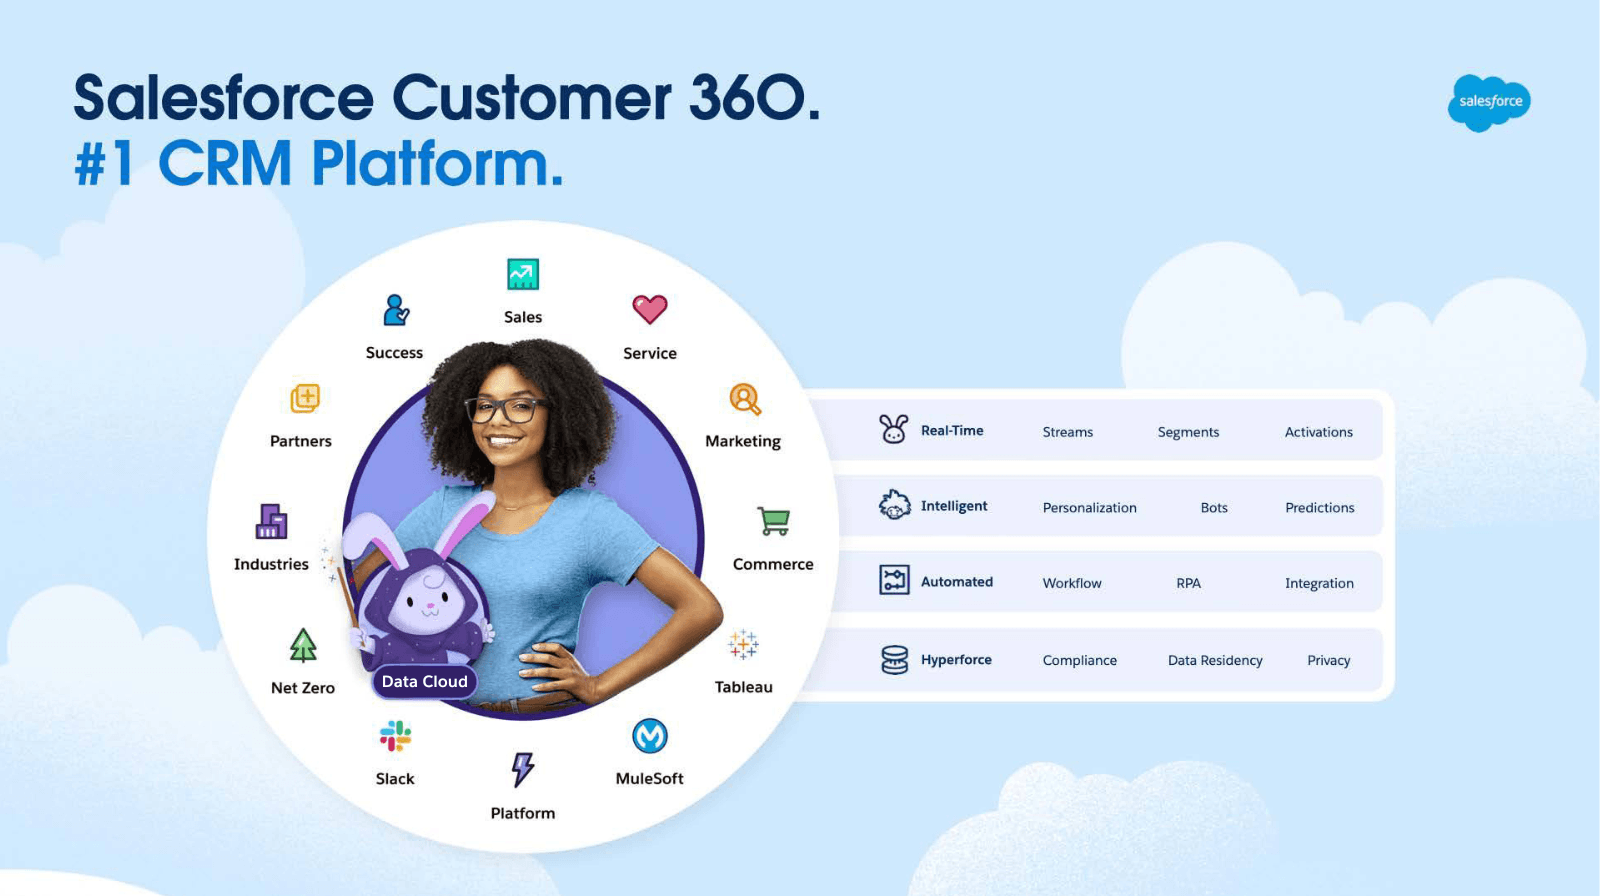 How Data Cloud Works: Data sources, Connect, Prepare, Harmonize, Unify, Analyze & Predict, Act, Applications, MarTech & Ads, with foundation of Salesforce Platform, Data Governance, and Hyperforce